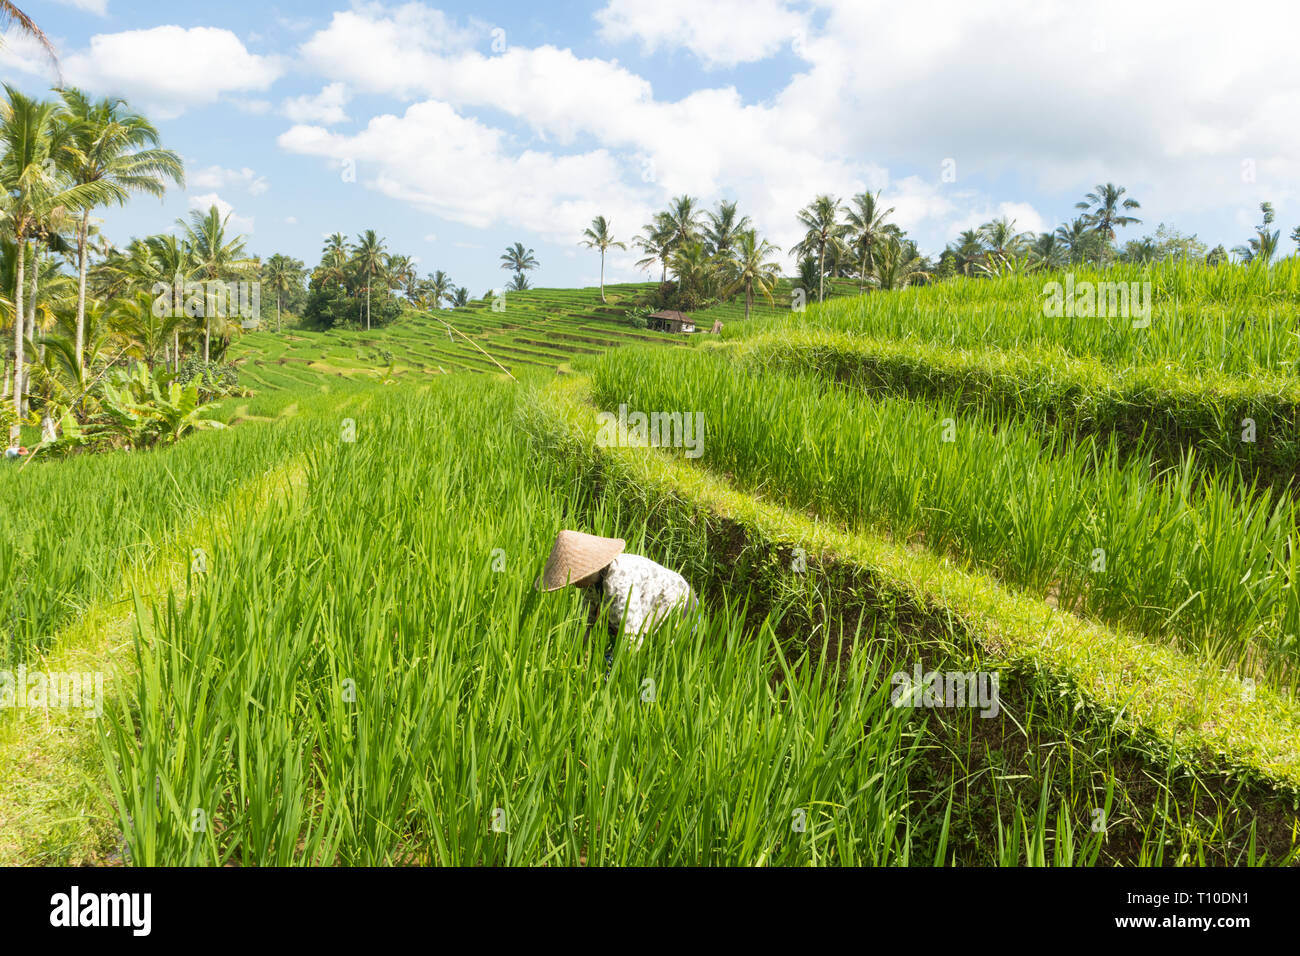 Female farmer wearing traditional asian paddy hat working in beautiful Jatiluwih rice terrace plantations on Bali, Indonesia, south east Asia Stock Photo